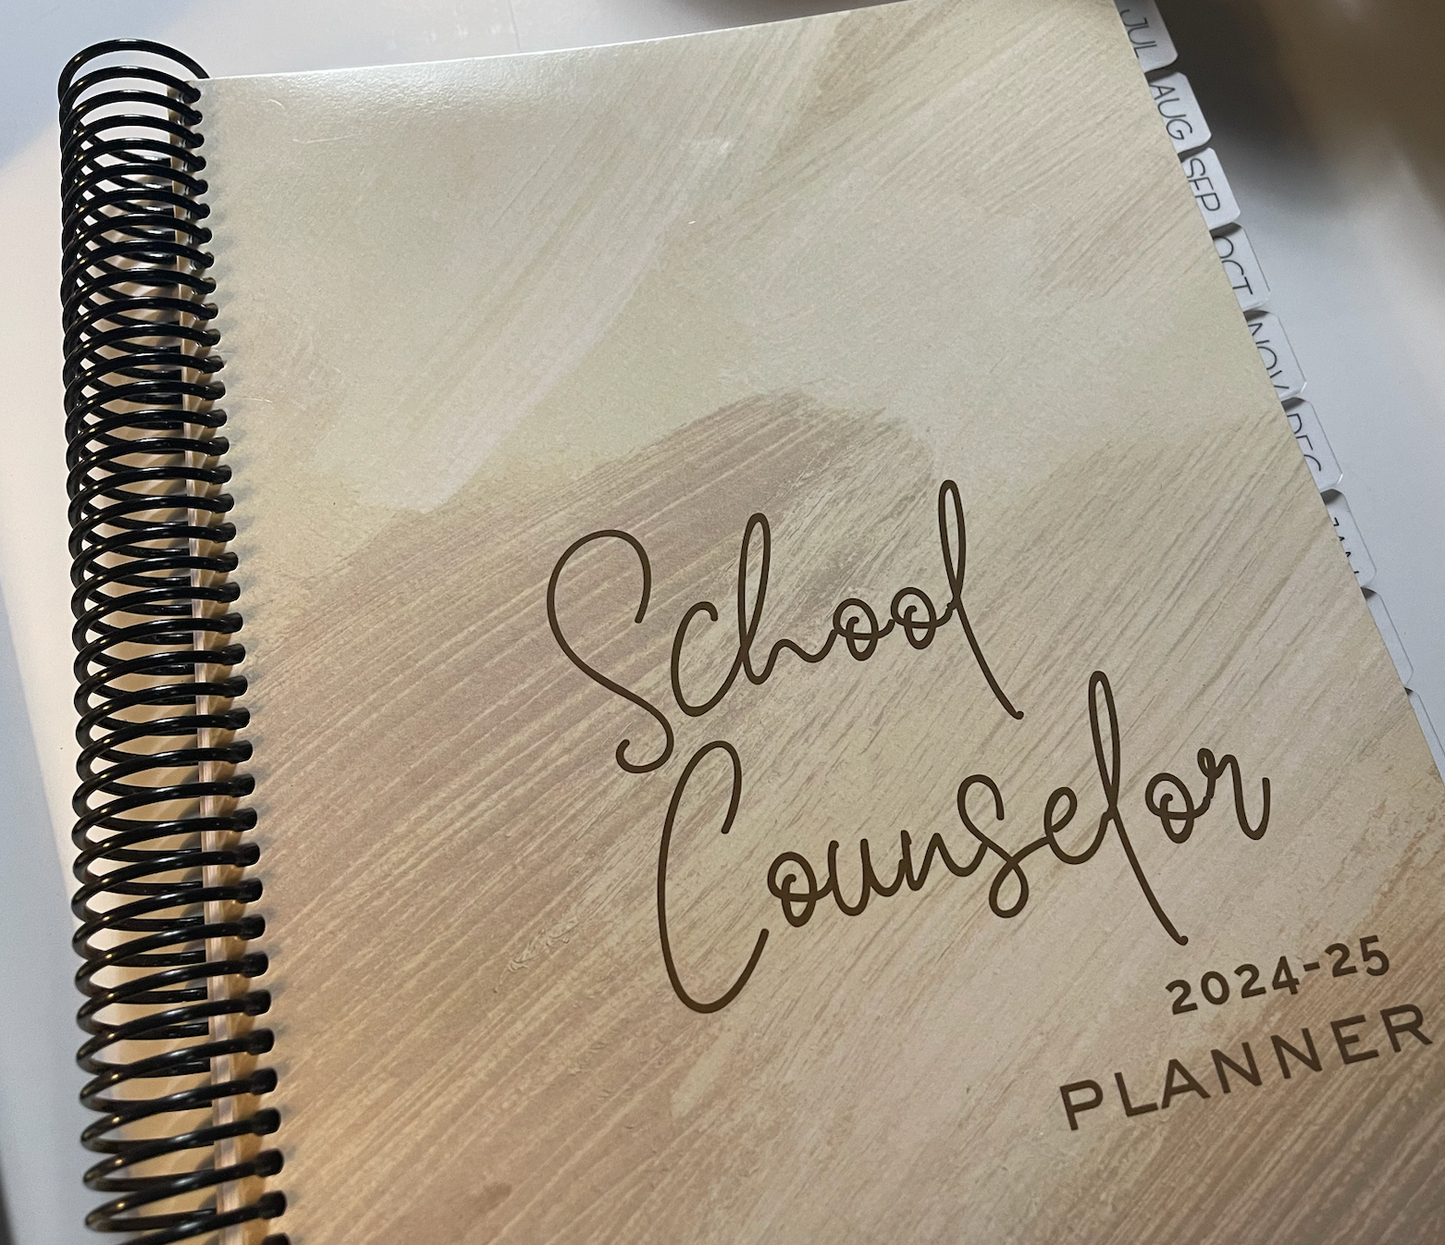 Free Shipping Printed Creamy School Counselor Planner 2024-2025 Size 9" X 11"